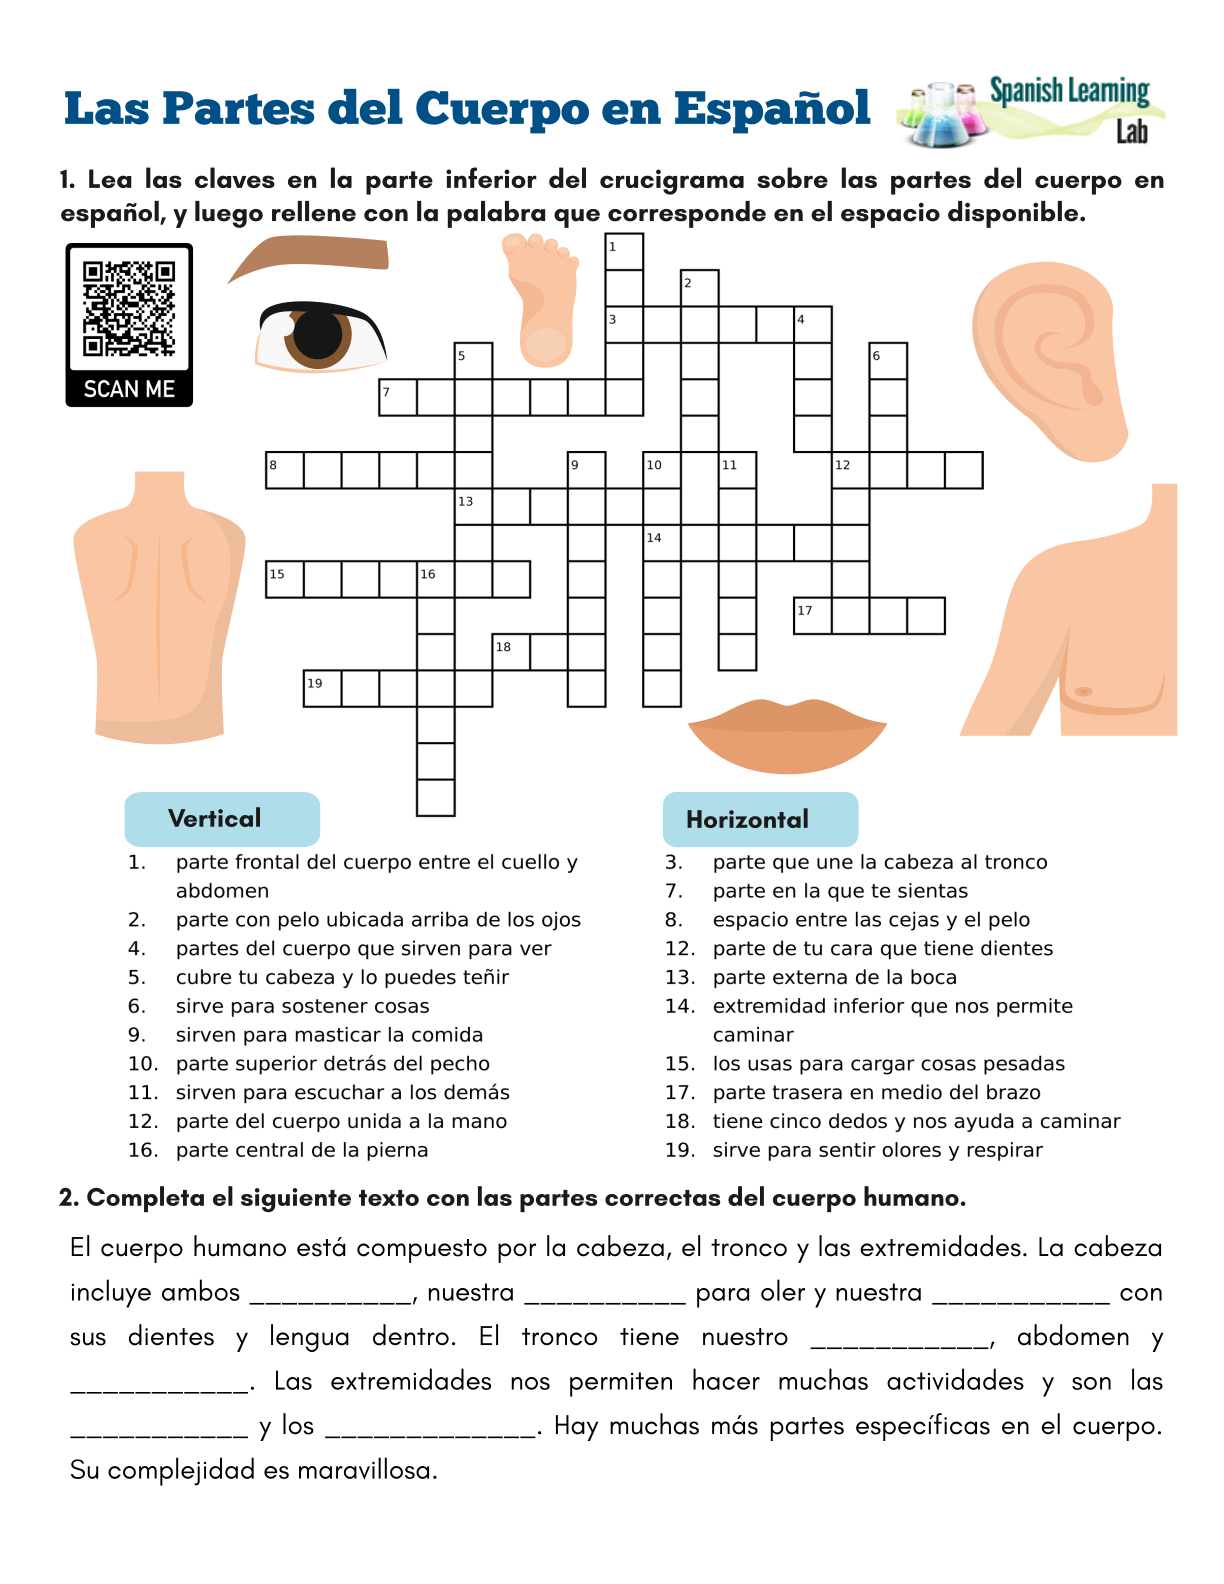 Parts of the Body in Spanish - PDF Crossword Puzzle For Spanish Body Parts Worksheet